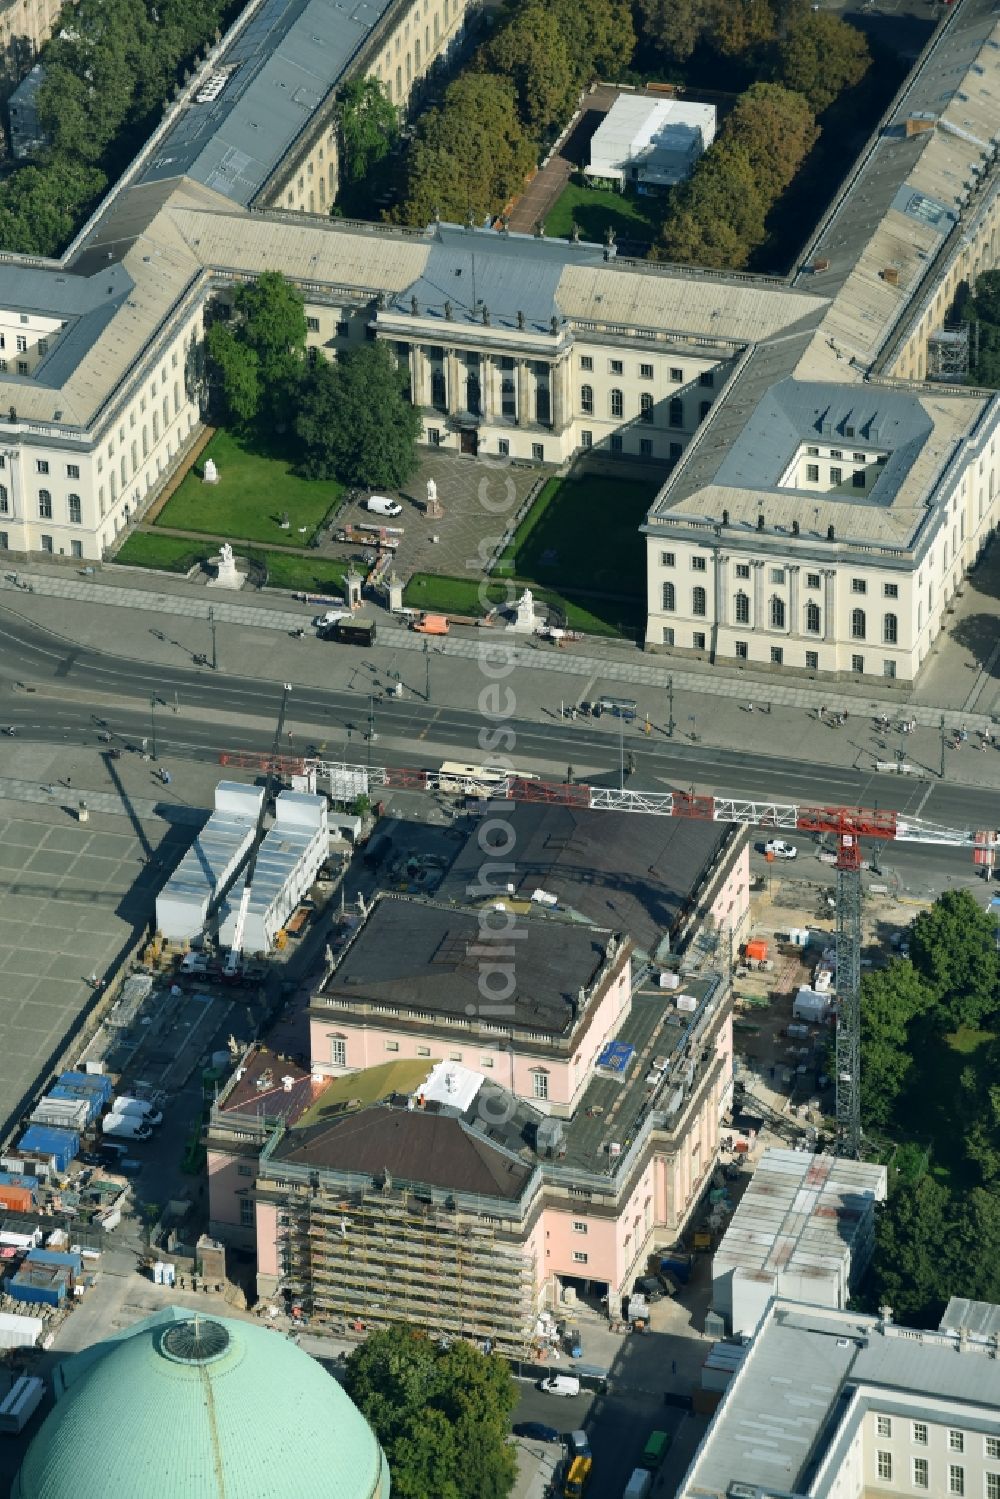 Berlin from the bird's eye view: Reconstruction and renovation of the building of the Staatsoper Unter den Linden in Berlin at Bebelplatz. It is the oldest opera house and theater building in Berlin. A new building will serve as stacks and warehouse for the Staatsoper Komplex. The architect HG Merz is a overseeing the reconstruction of the historical building complex